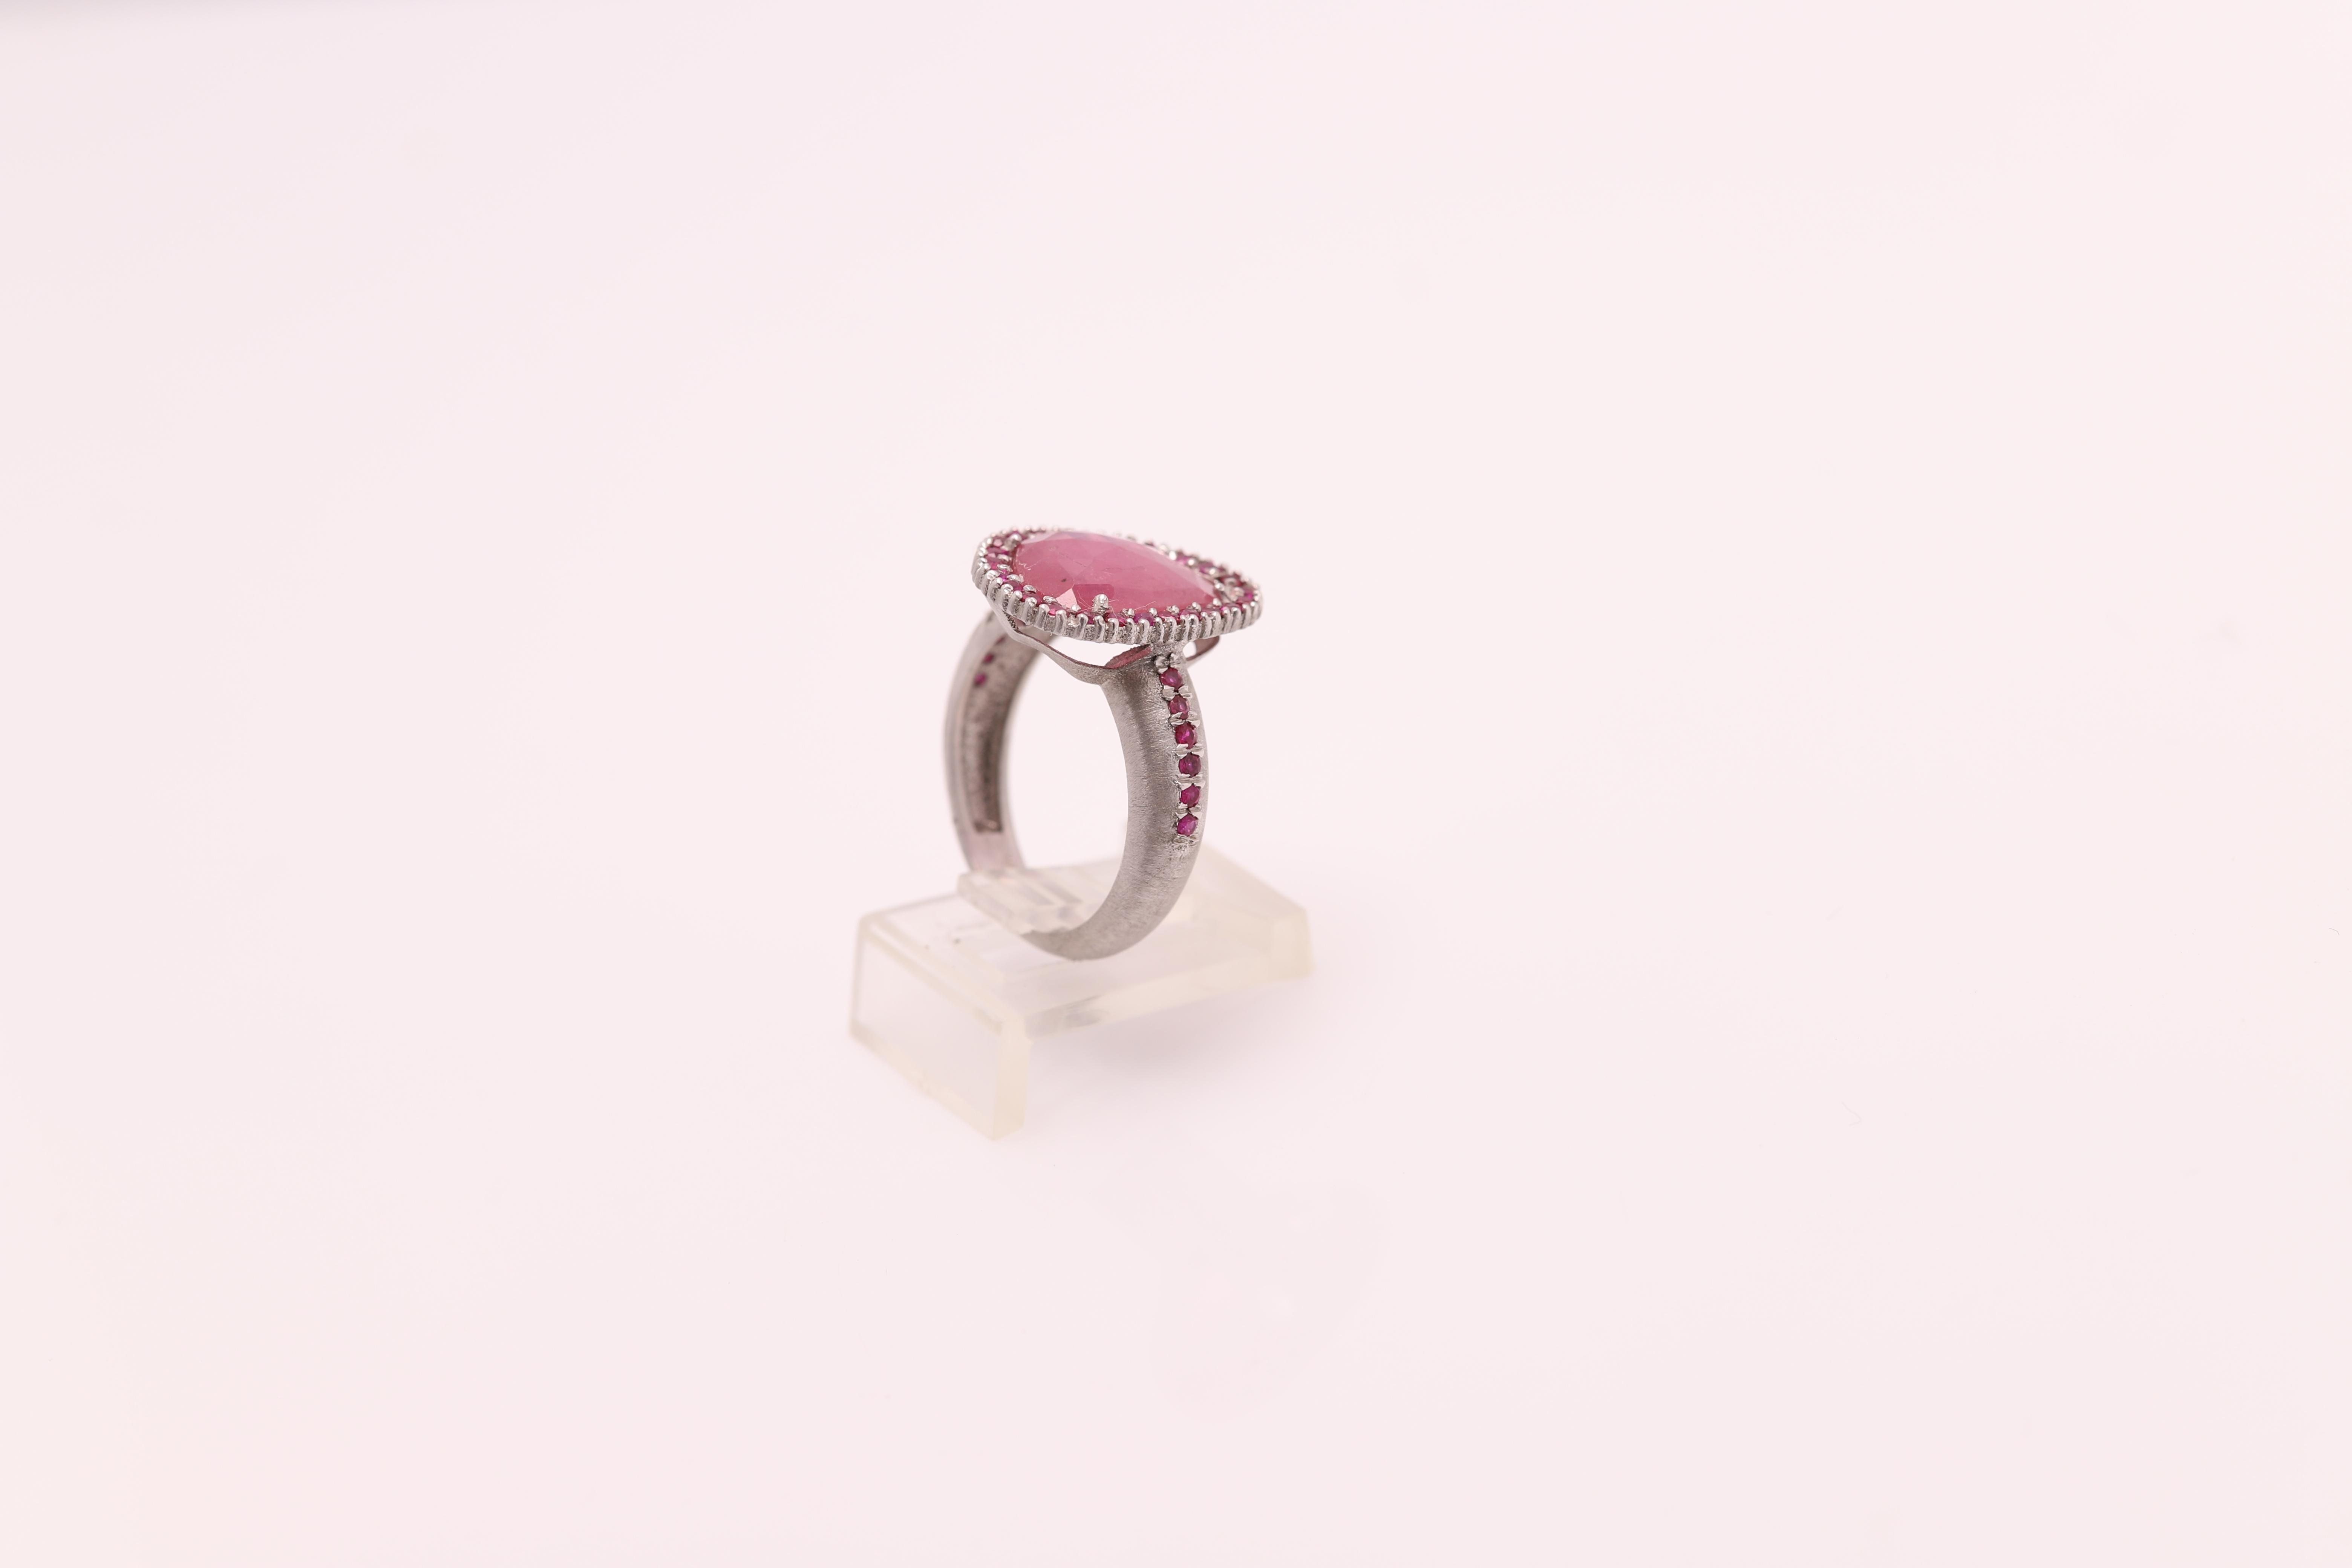 Vintage Pink Tourmaline Ring - Hand Made in Italy
14k White Gold 6.3 grams - mat finish (not shiny)
Small Round strong Pink Tourmaline around center.
Center is a 